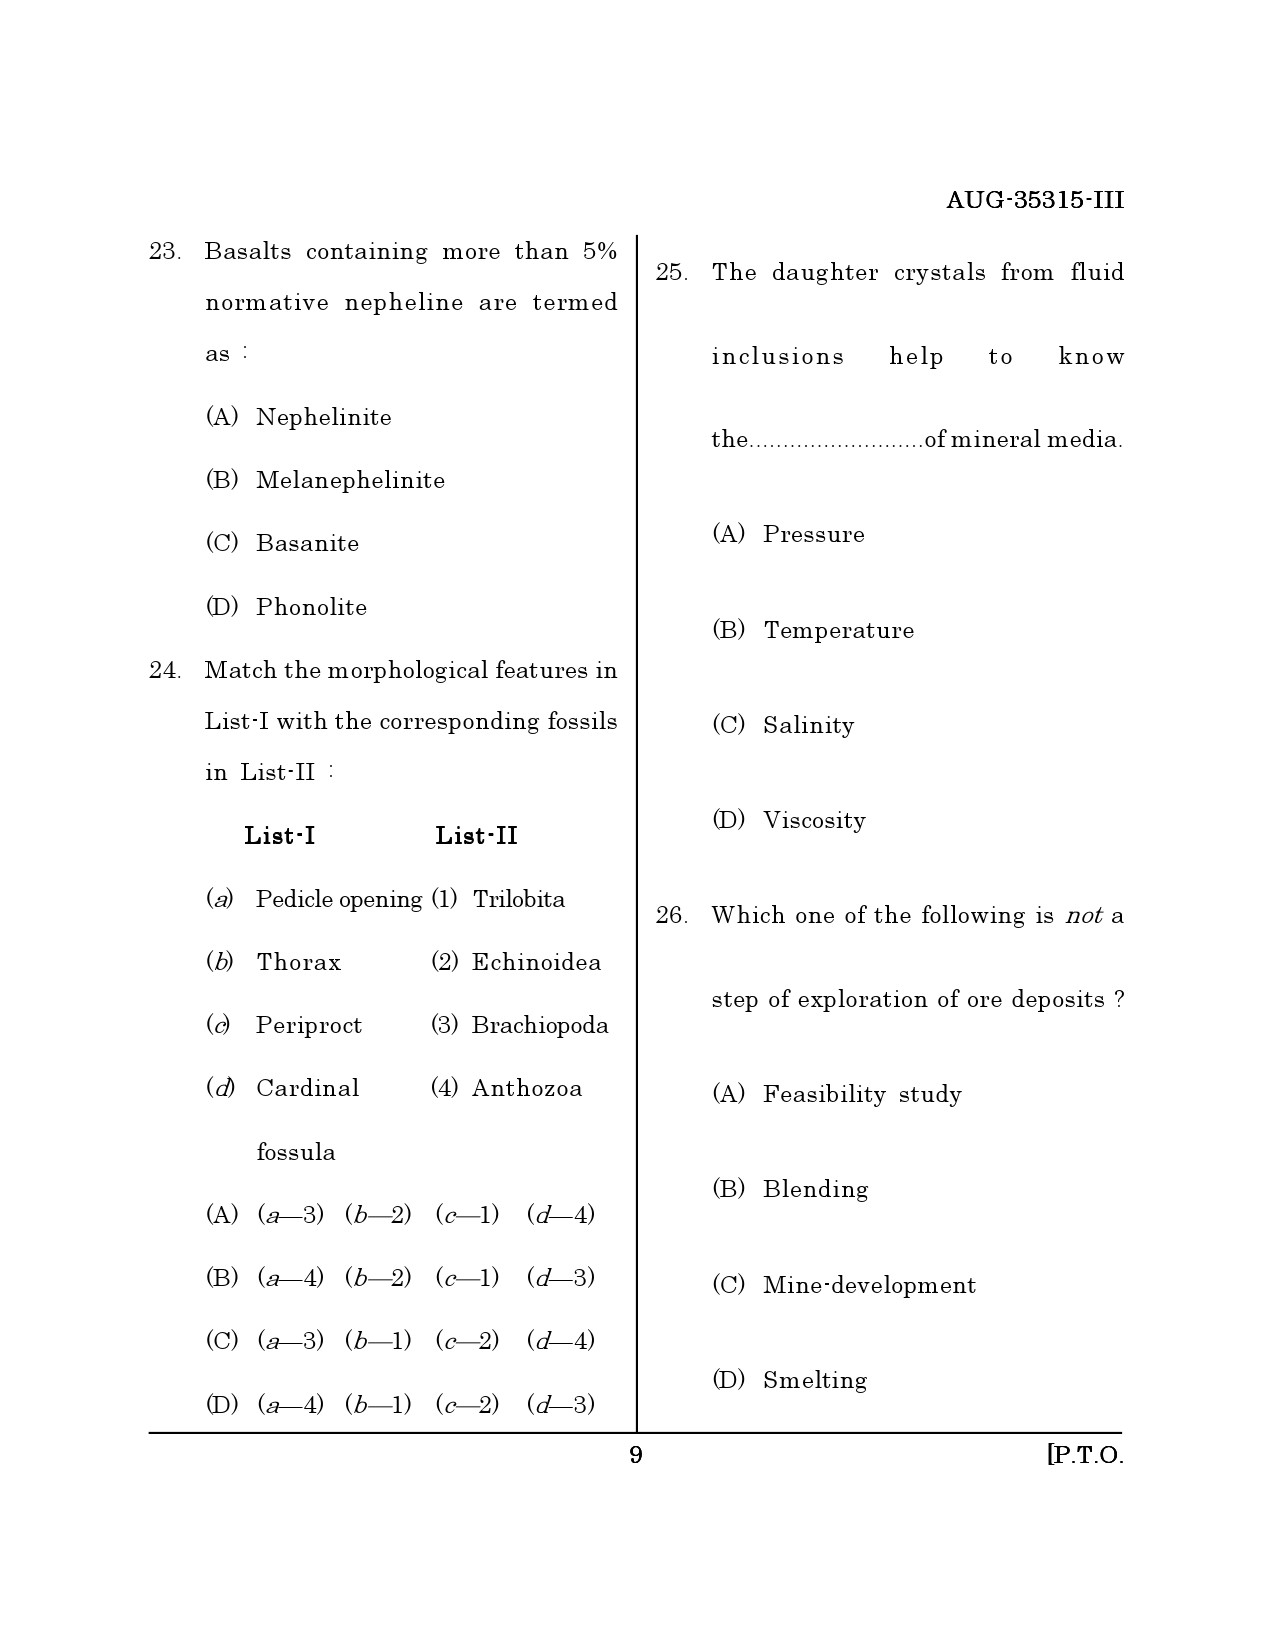 Maharashtra SET Earth Atmospheric Ocean Planetary Science Question Paper III August 2015 8